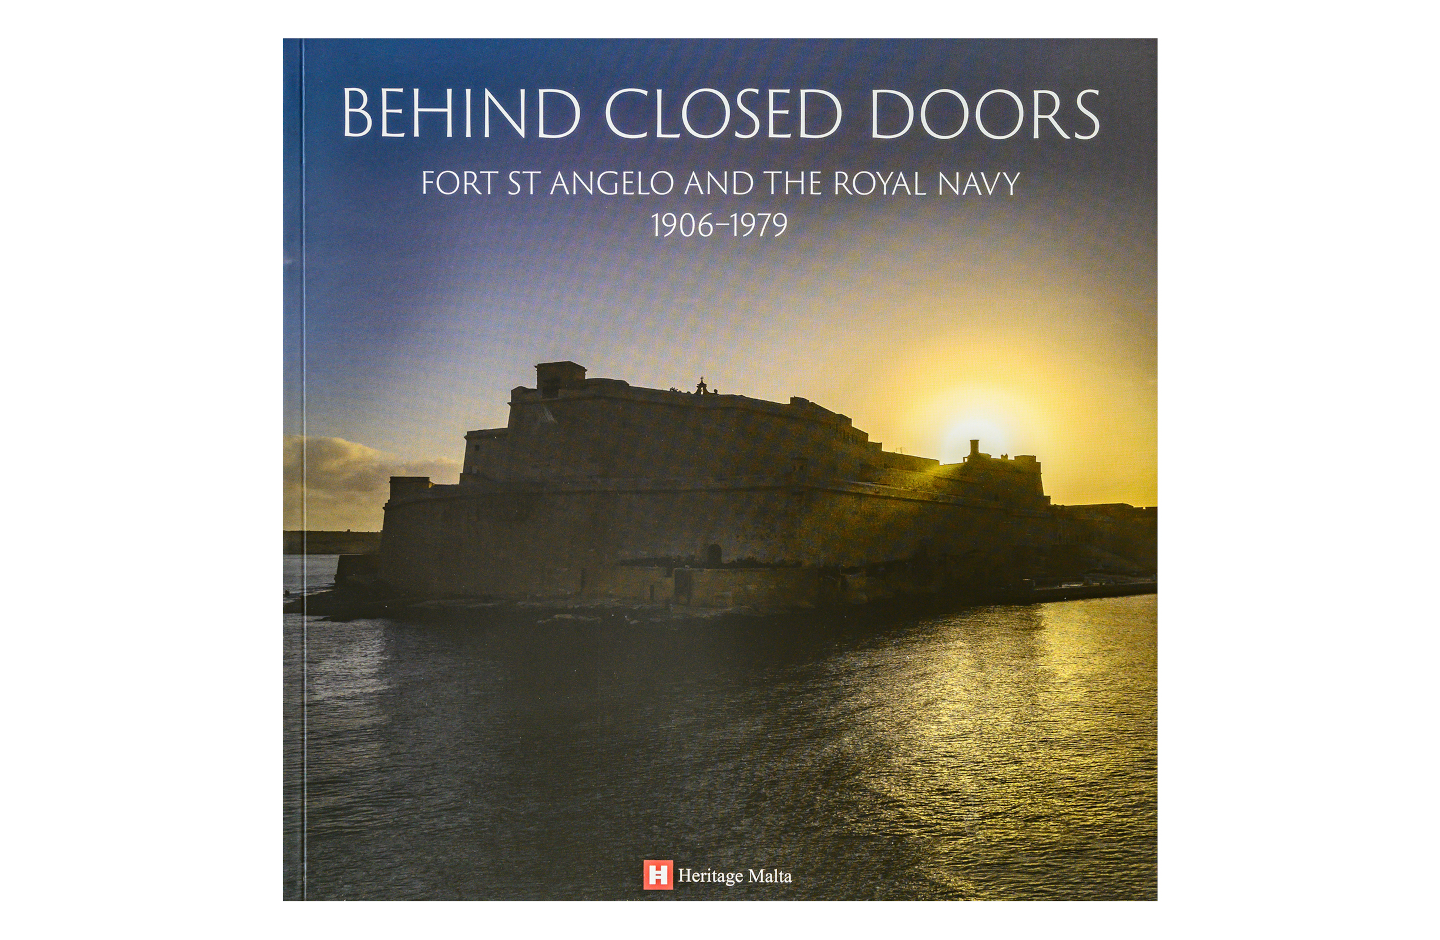 Behind Closed Doors: Fort St Angelo and the Royal Navy 1906-1979